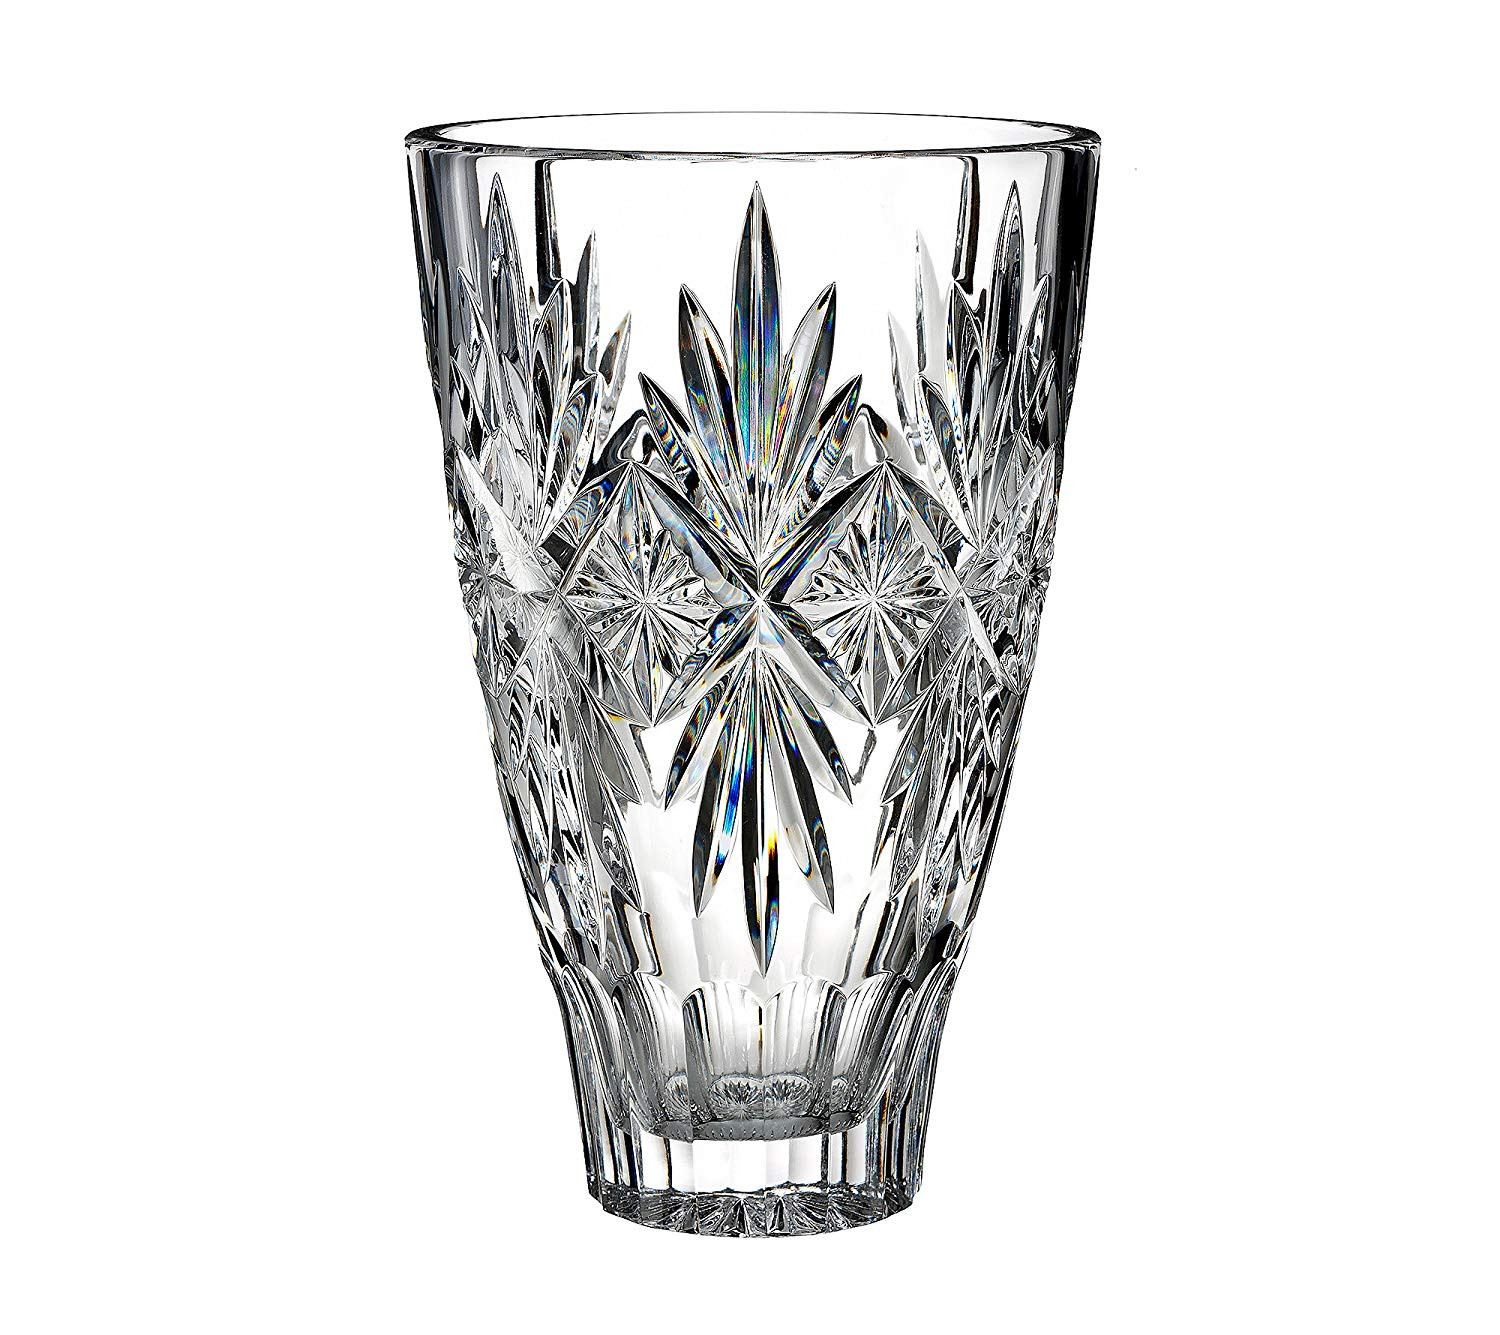 24 Perfect Waterford Lismore 8 Flared Vase 2024 free download waterford lismore 8 flared vase of amazon com waterford normandy vase home kitchen regarding 912uf oesel sl1500